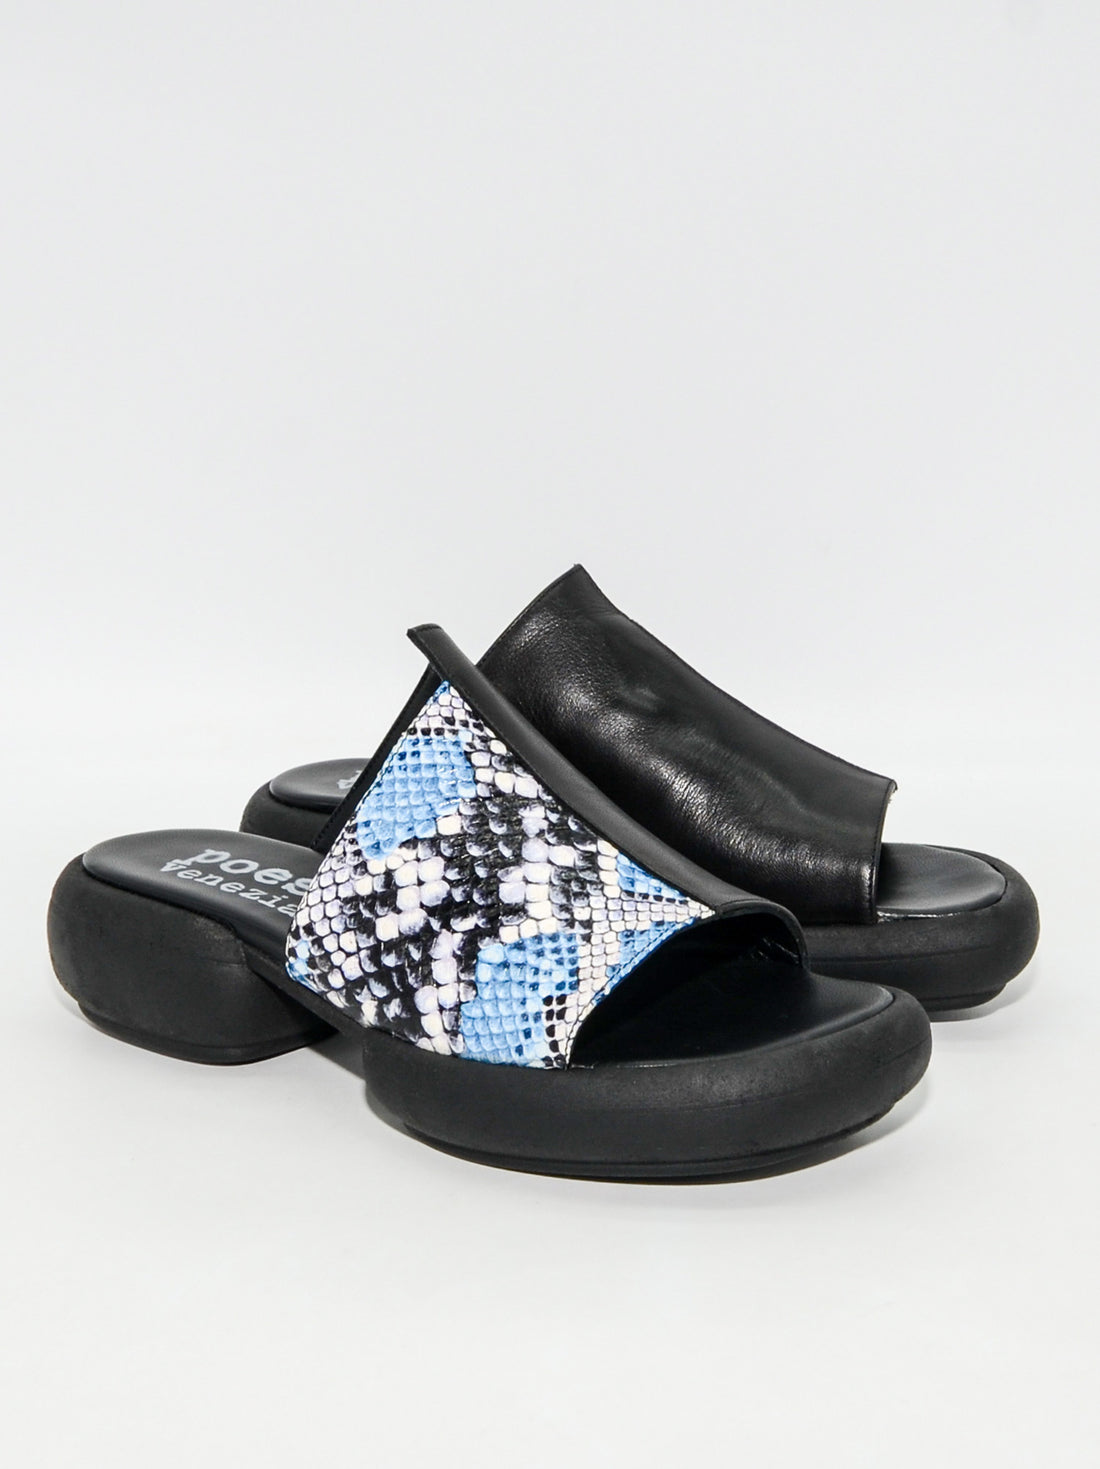 JCP02 SNAKE PRINT LEATHER MULES